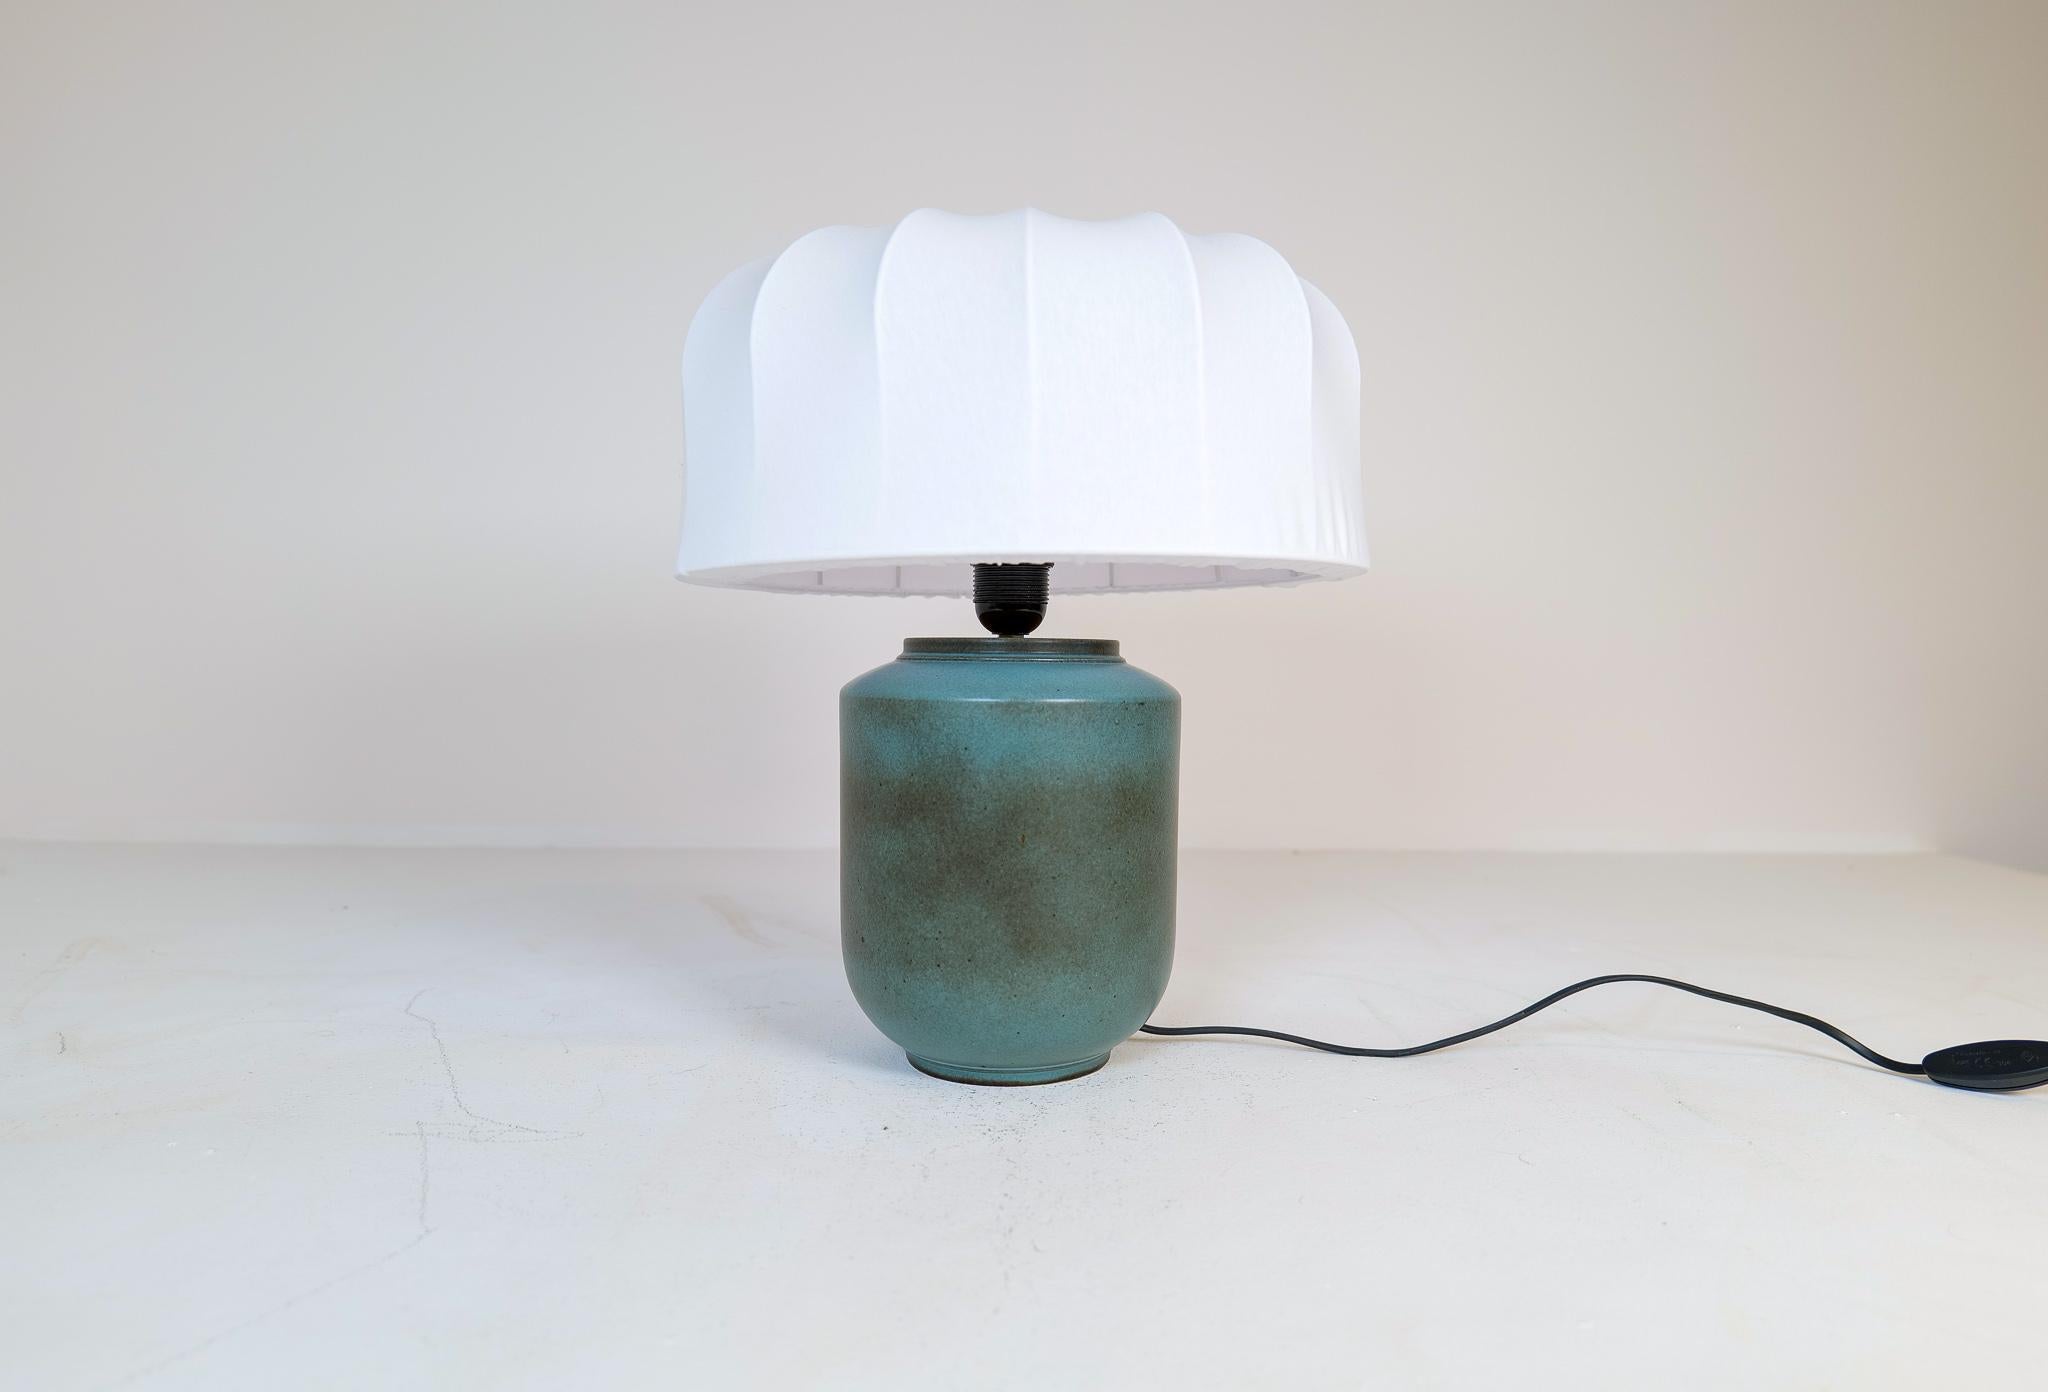 Elegant ceramic table lamp by Gunnar Nylund for Rörstrand, Sweden. The colors of the glaze have a very shifting and elegant look. This ceramic lamp piece is a rare one to find. The shade is a new mushroom shade made in Sweden. 

Good working